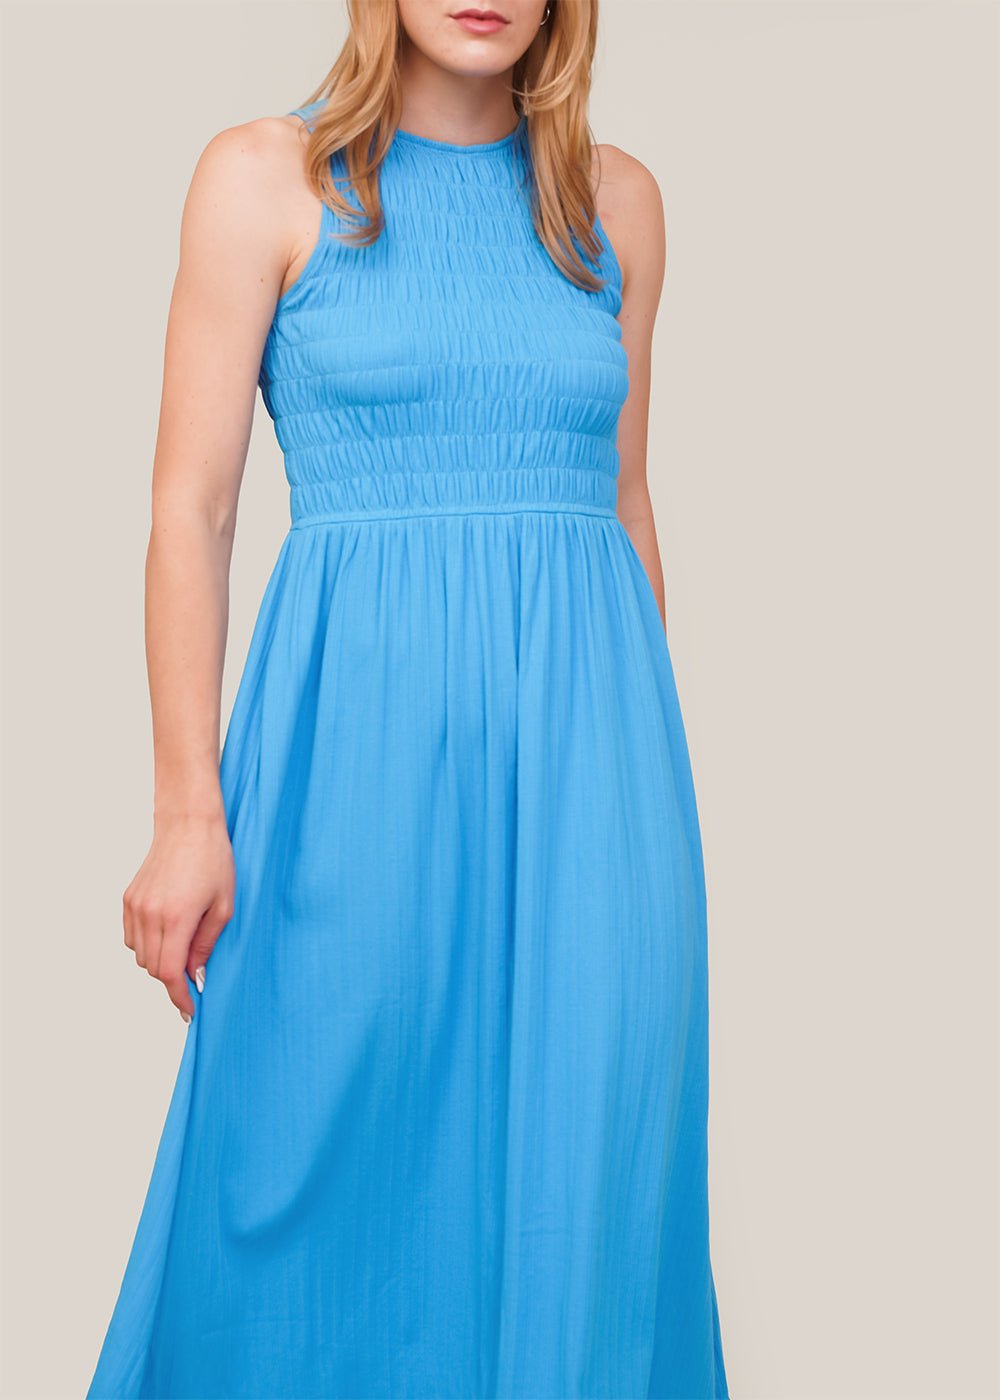 WRAY Ocean Flor Dress - New Classics Studios Sustainable Ethical Fashion Canada